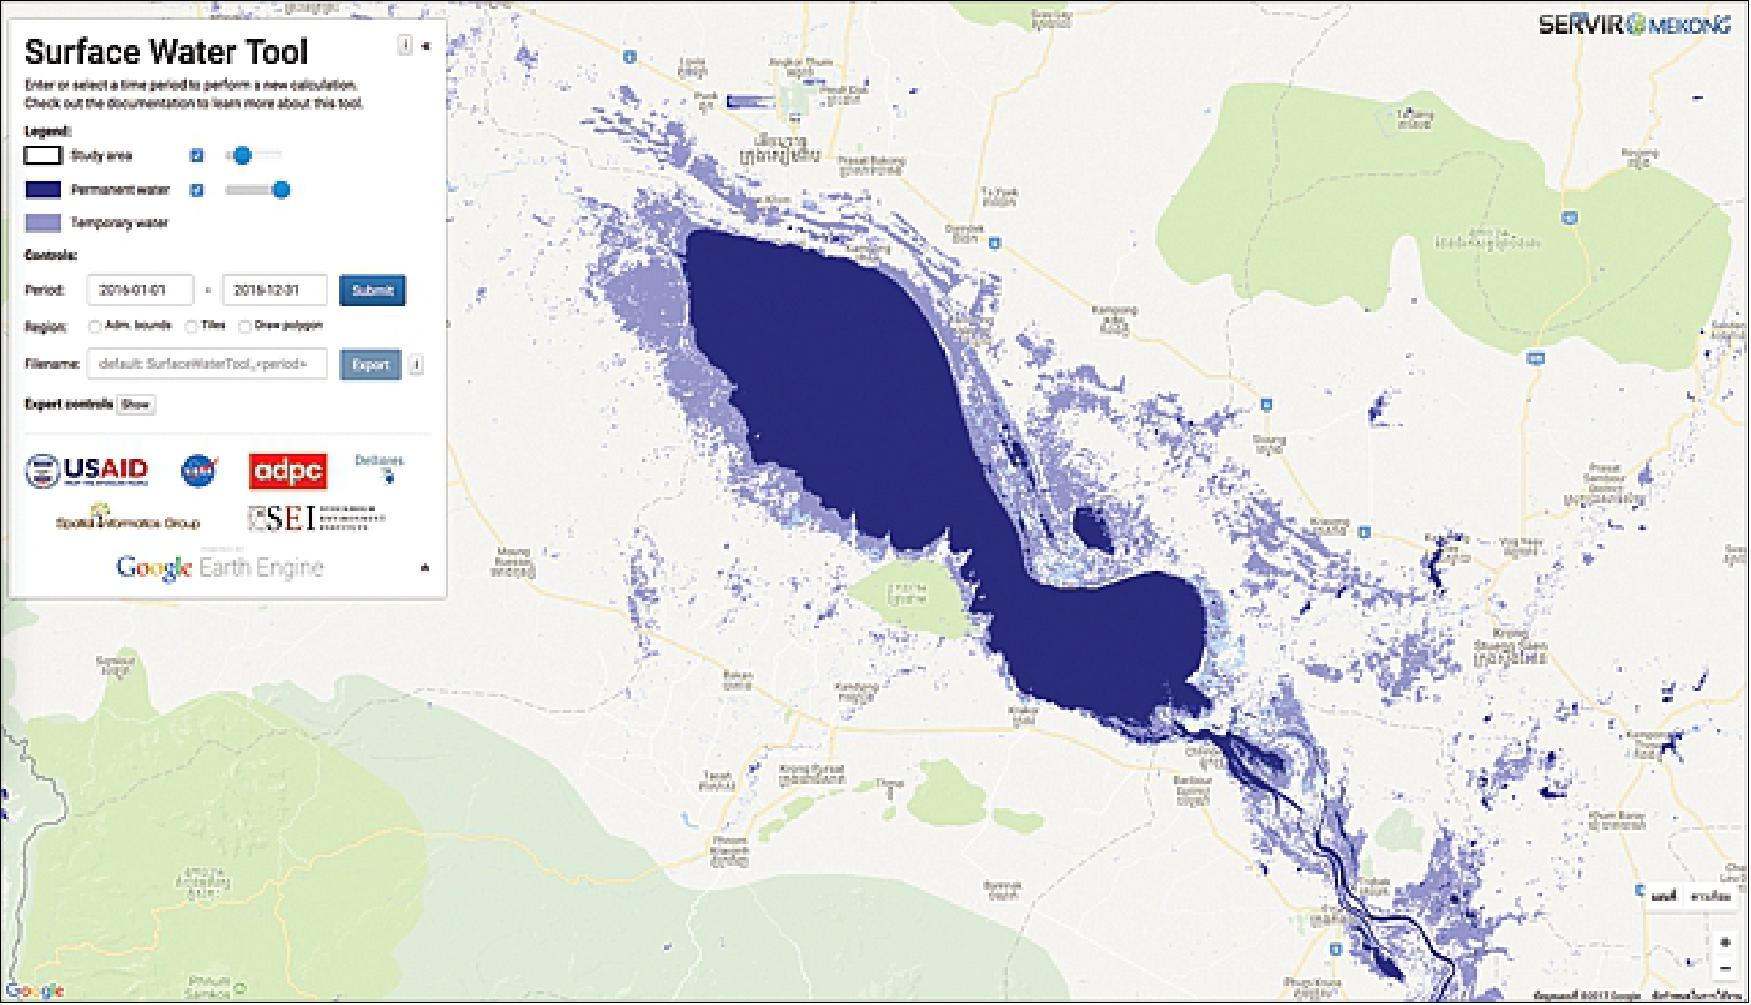 Figure 8: SWMT (Surface Water Mapping Tool) is used to assess how proposed dams might impact the seasonal water cycles of wetlands along the Mekong (image credit: SERVIR-Mekong/ADPC)